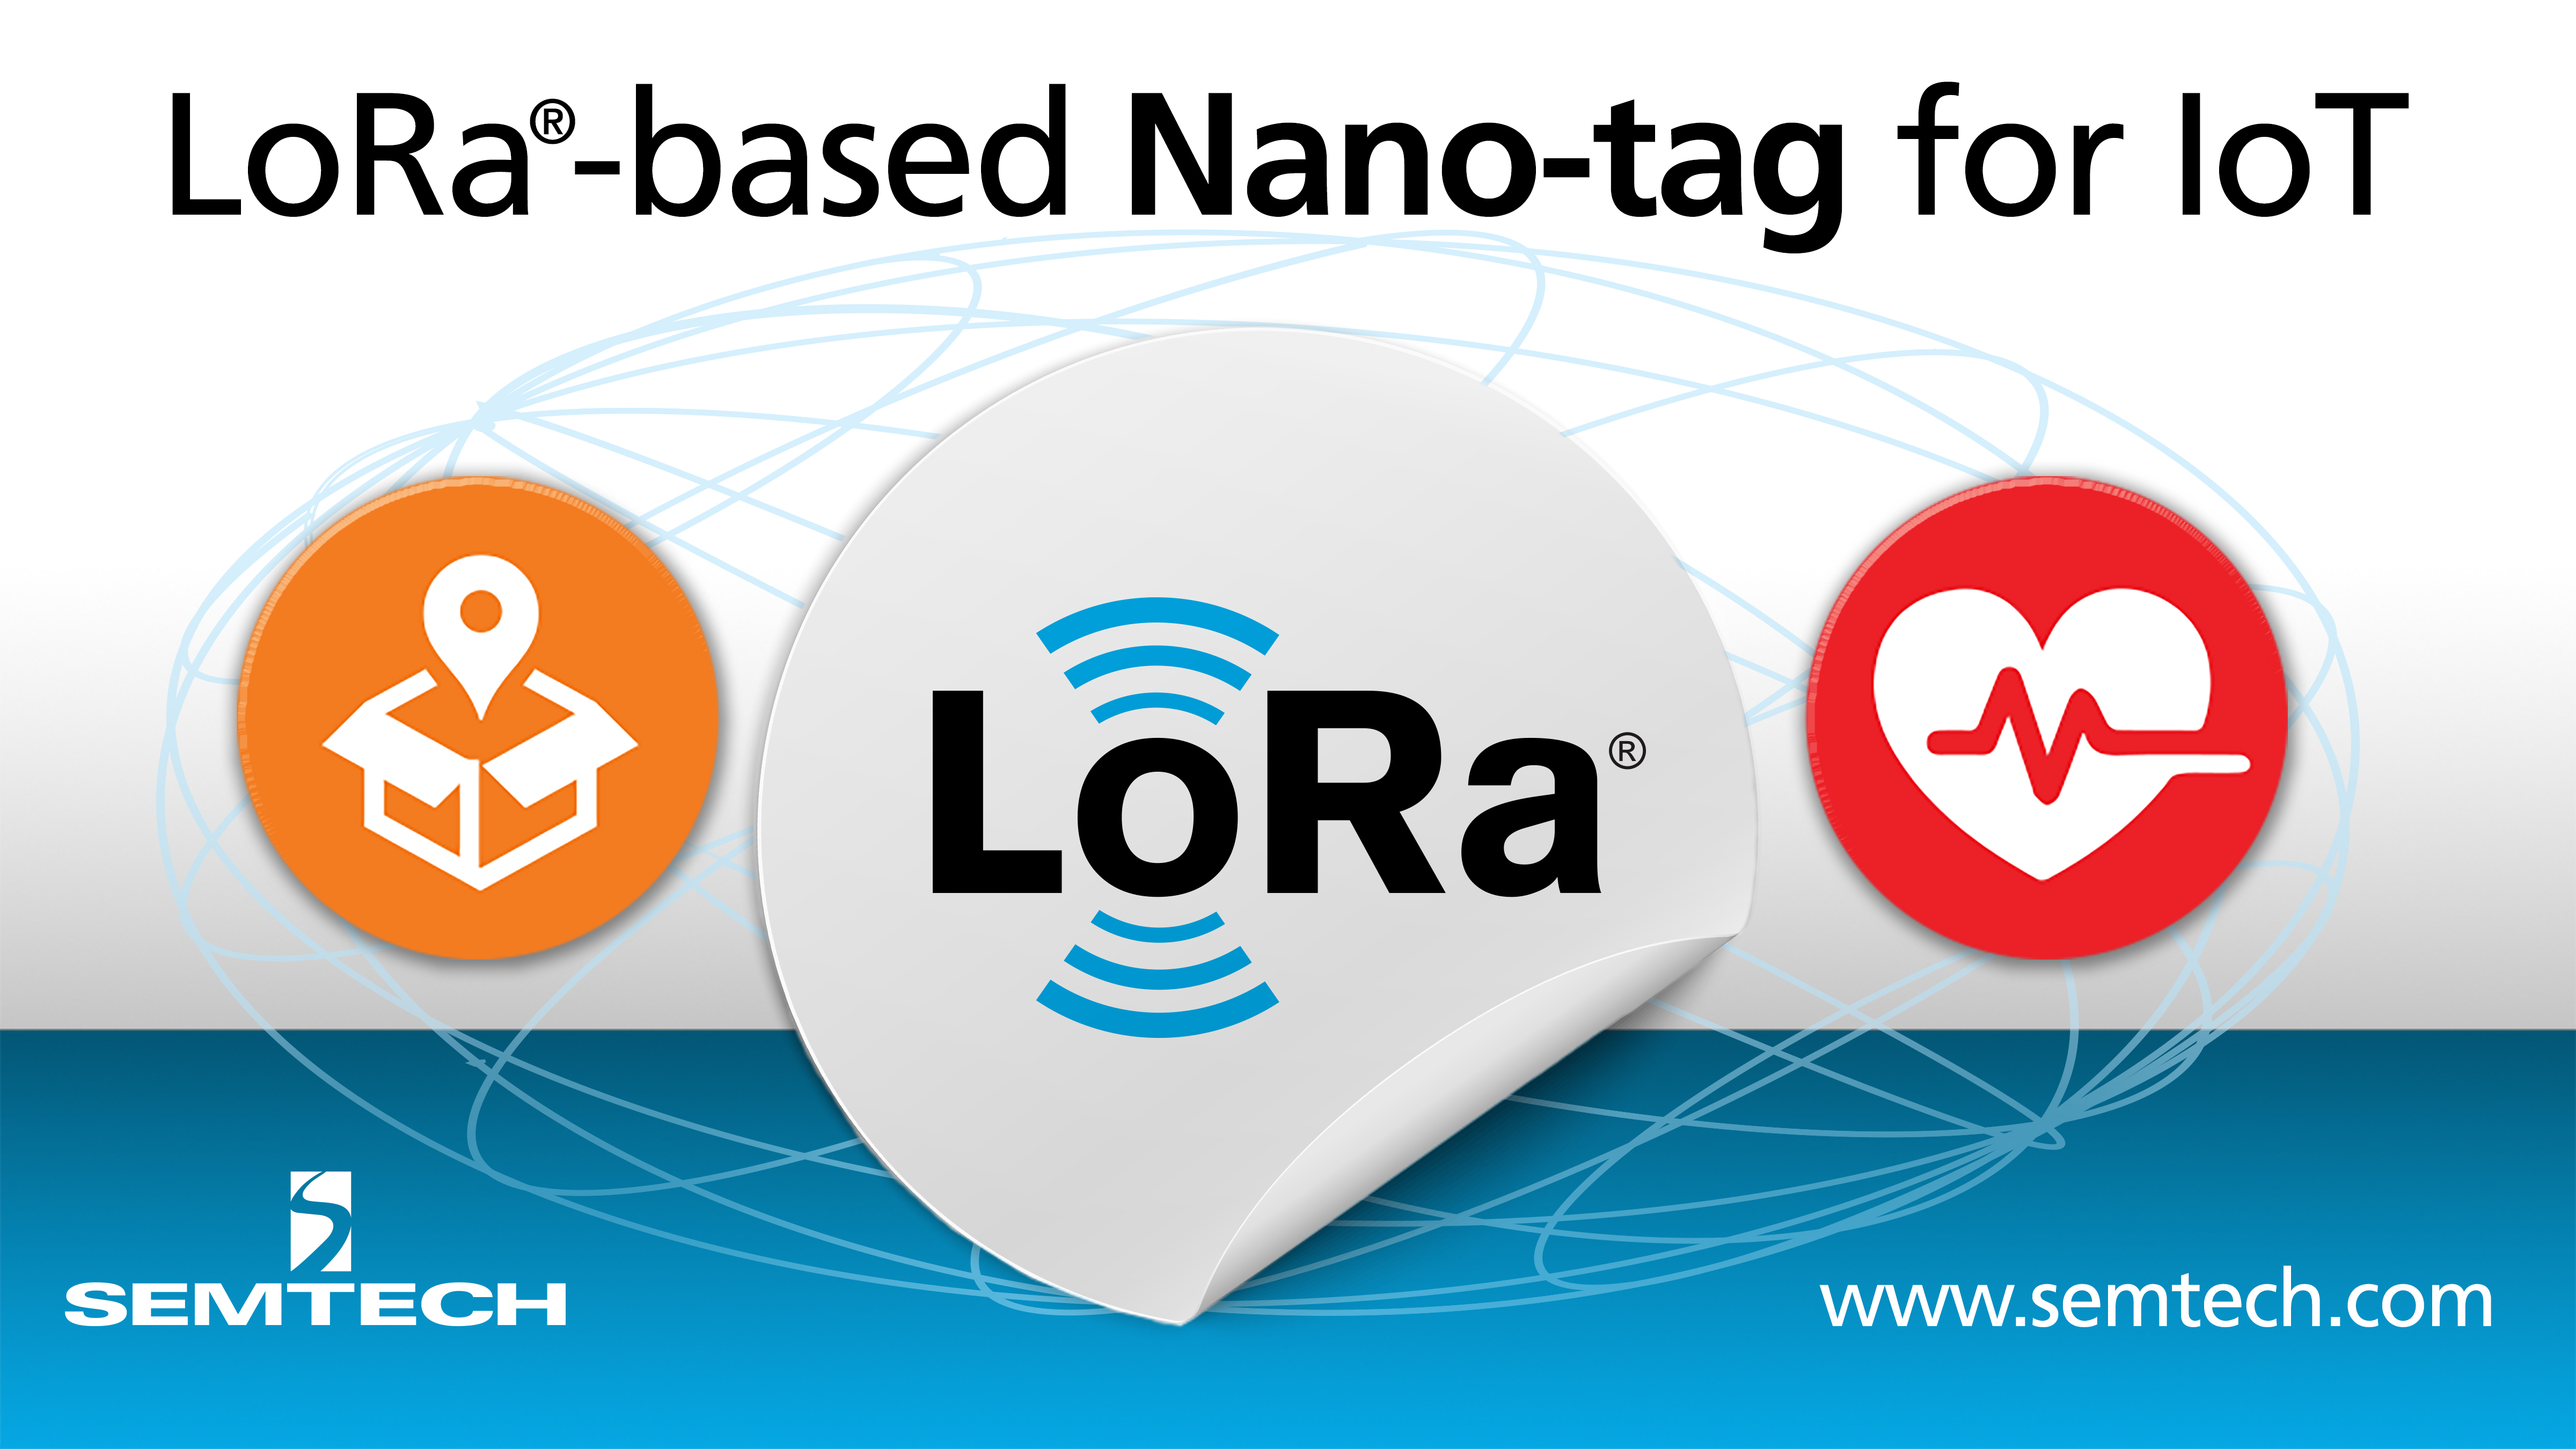 Semtech’s LoRa-enabled Tag